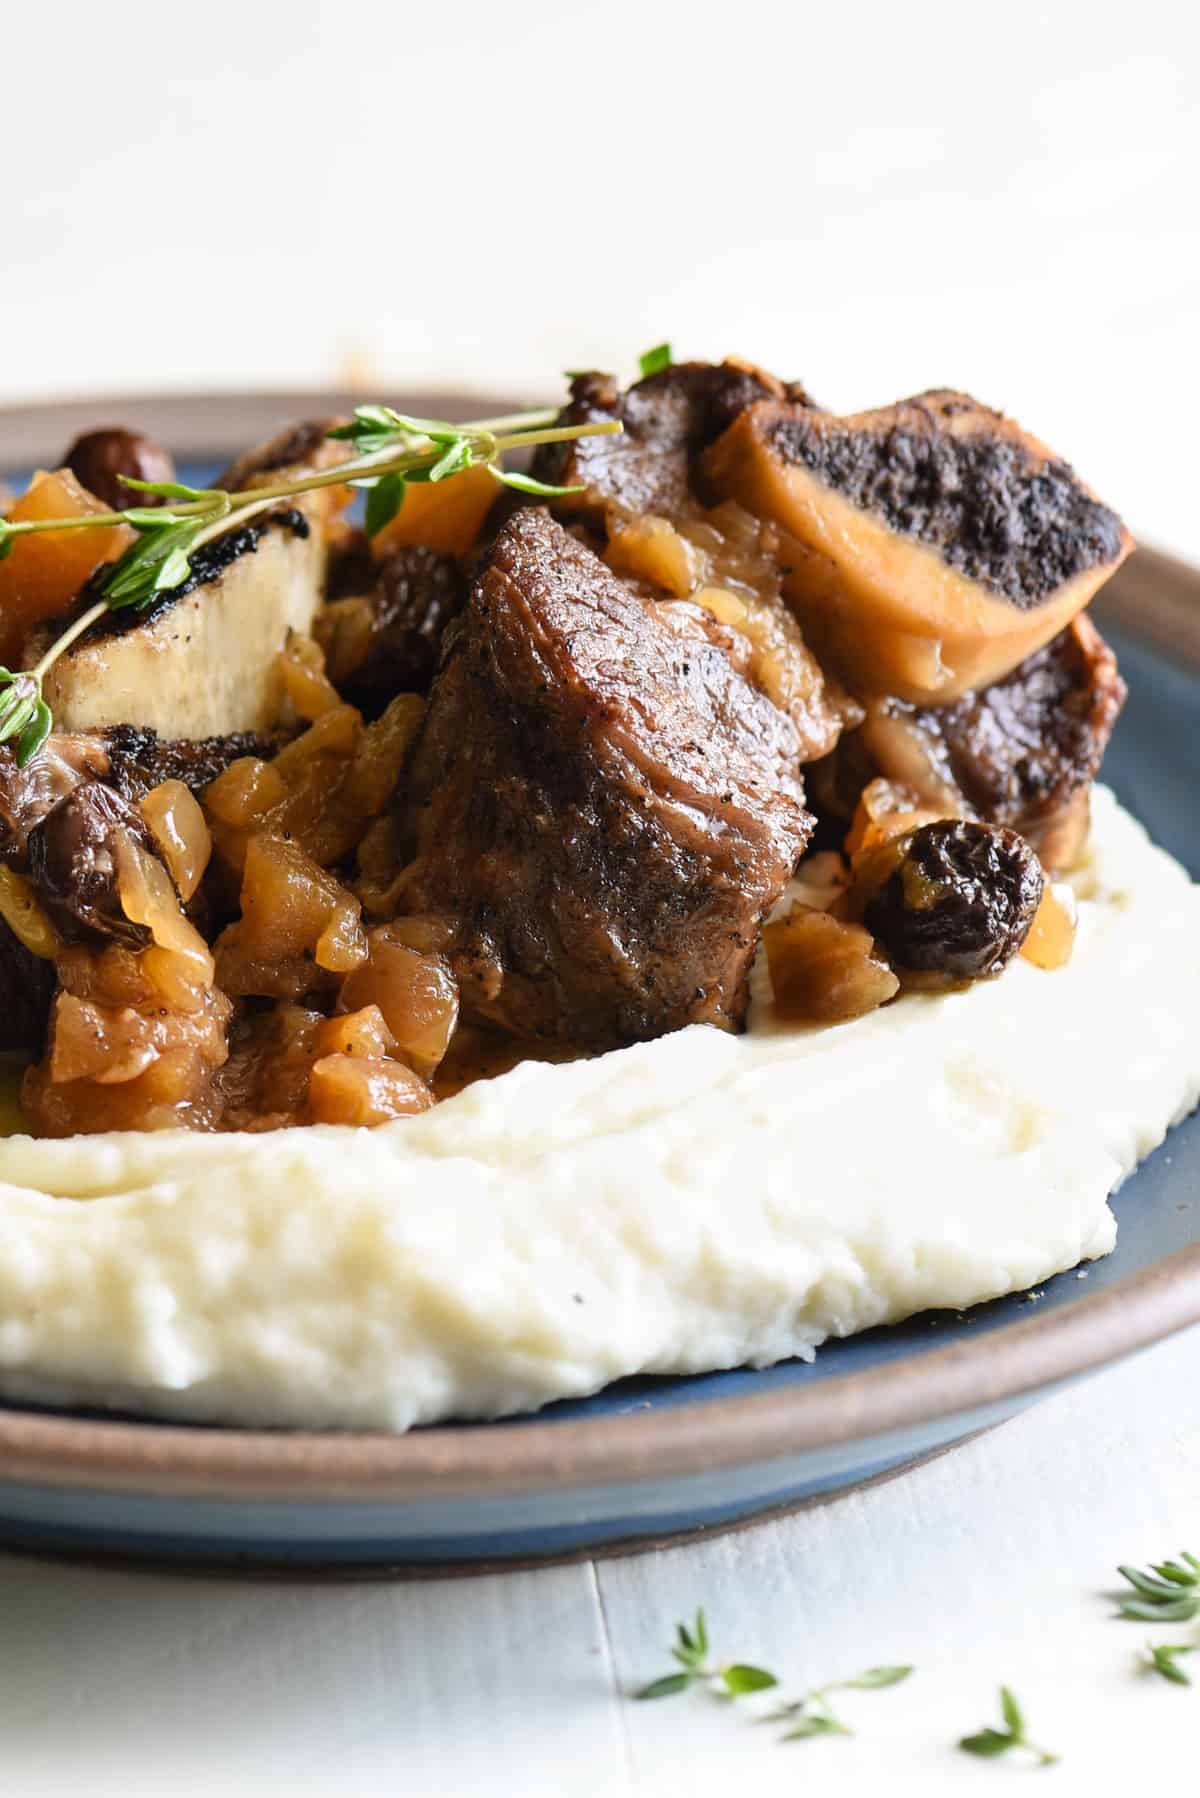 Shallow blue bowl filled with mashed potatoes, topped with Instant Pot short ribs and garnished with thyme.